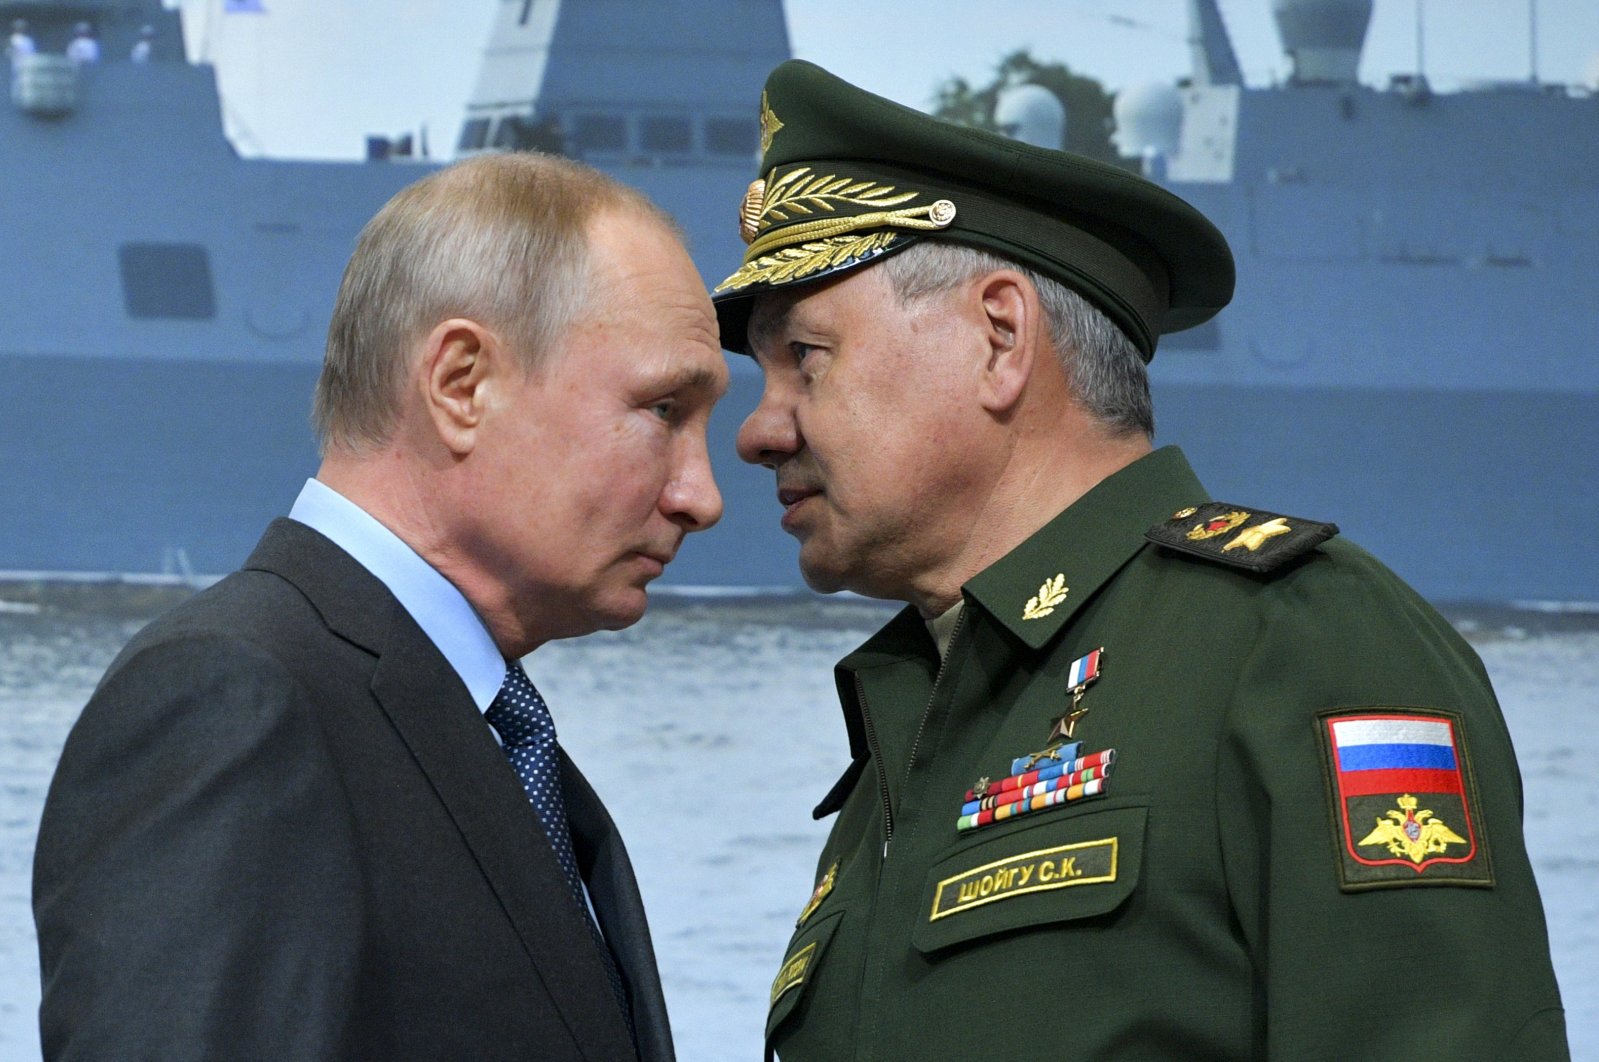 Russian President Vladimir Putin (L) and Russian Defense Minister Sergei Shoigu during a visit to a shipyard in St. Petersburg, Russia, April 23, 2019. (AP Photo)